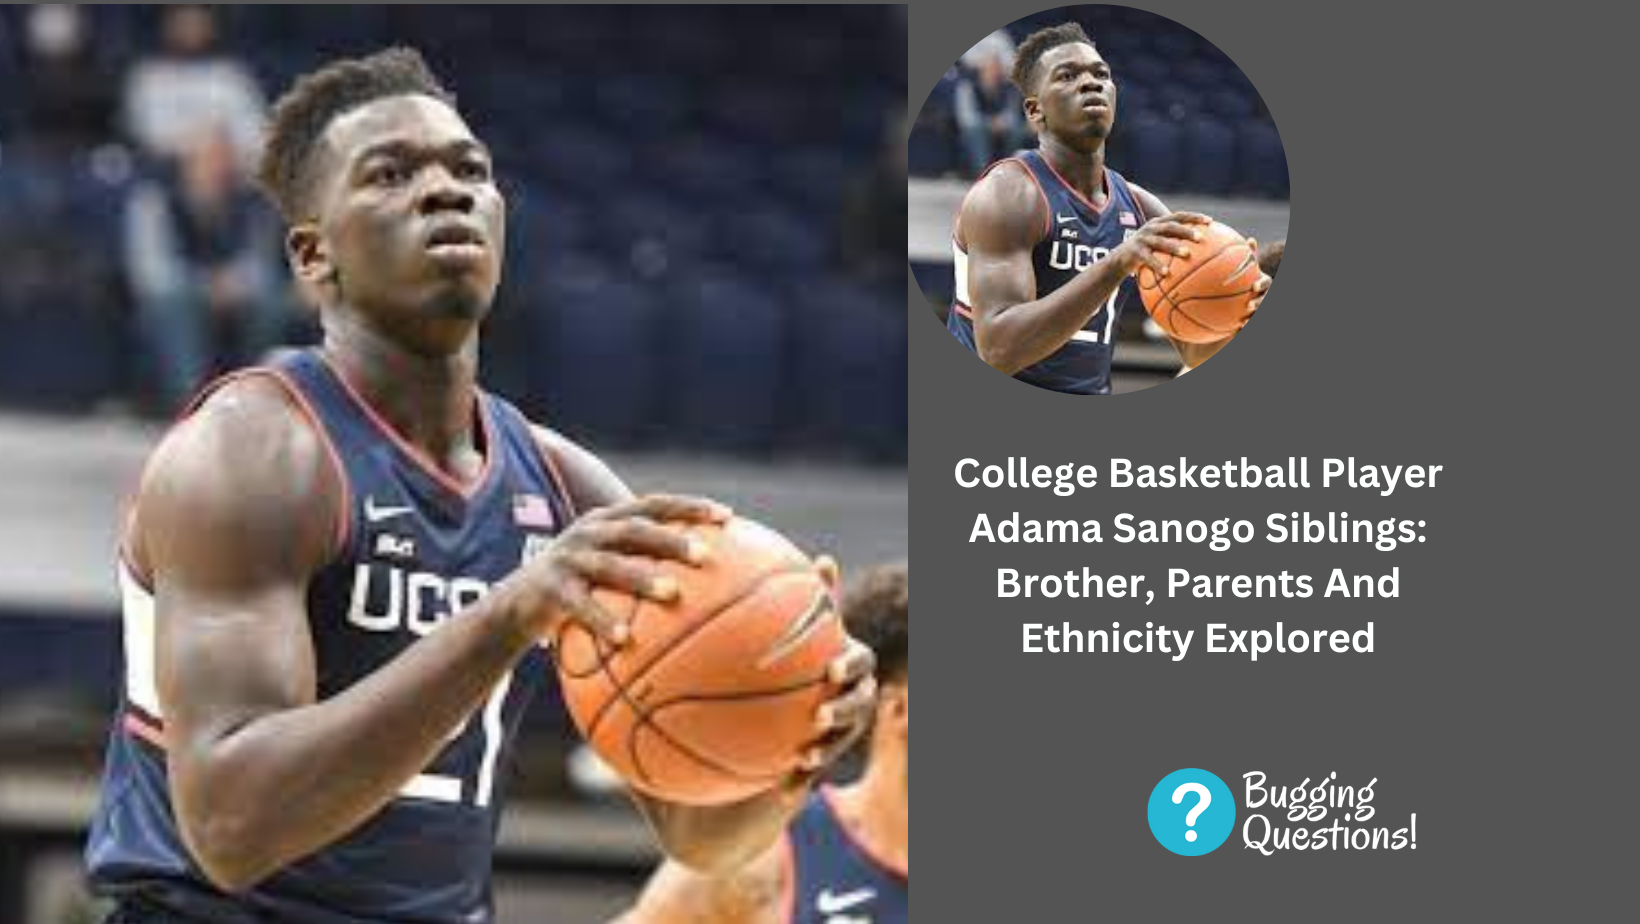 College Basketball Player Adama Sanogo Siblings: Brother, Parents And Ethnicity Explored